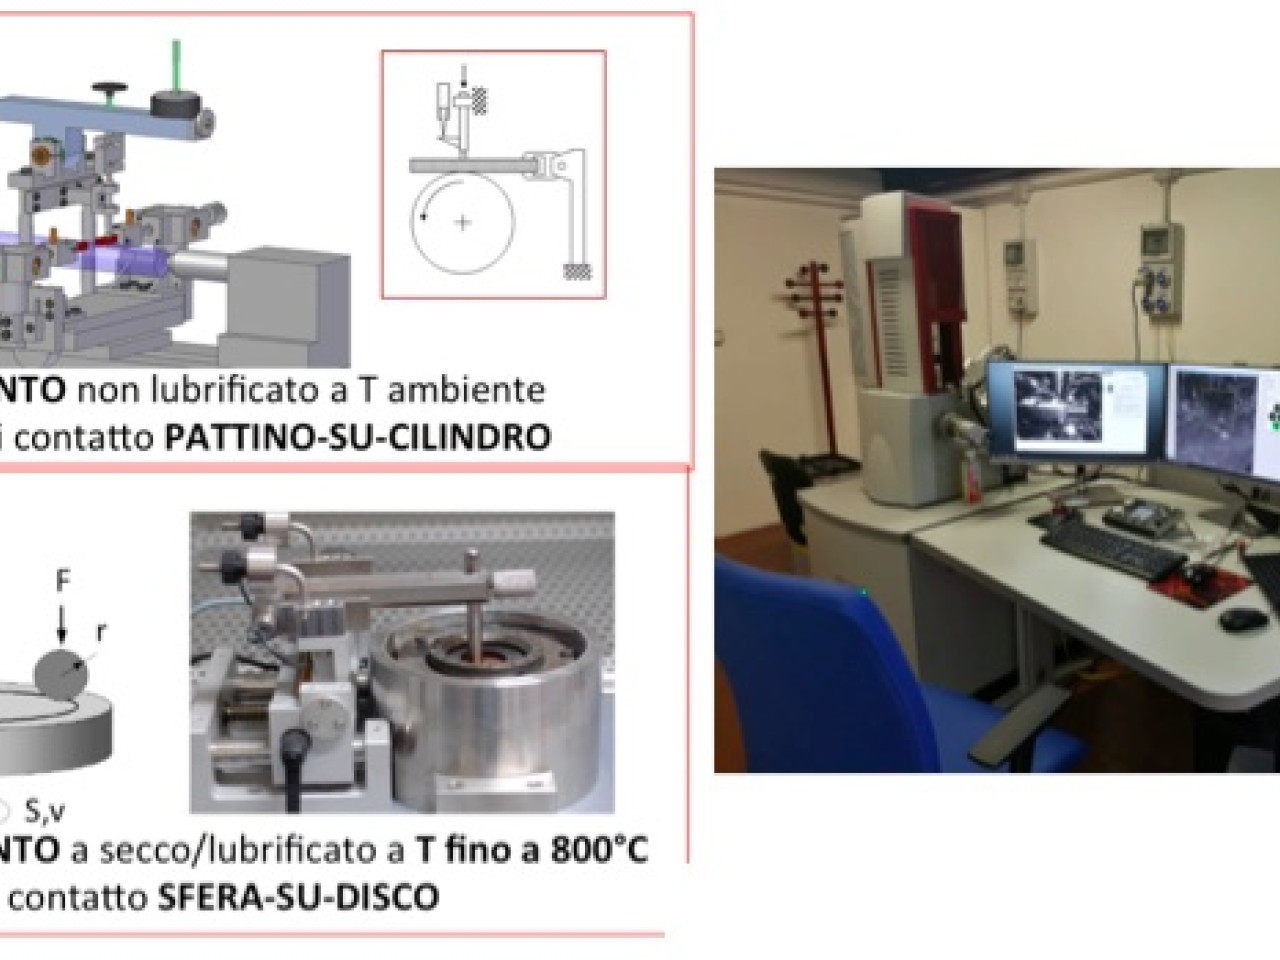 Tribometers for friction and wear measurements (accelerated lab tests) and Field Emission Gun Scanning Electron Microscope (FEG-SEM) with EDS microprobe